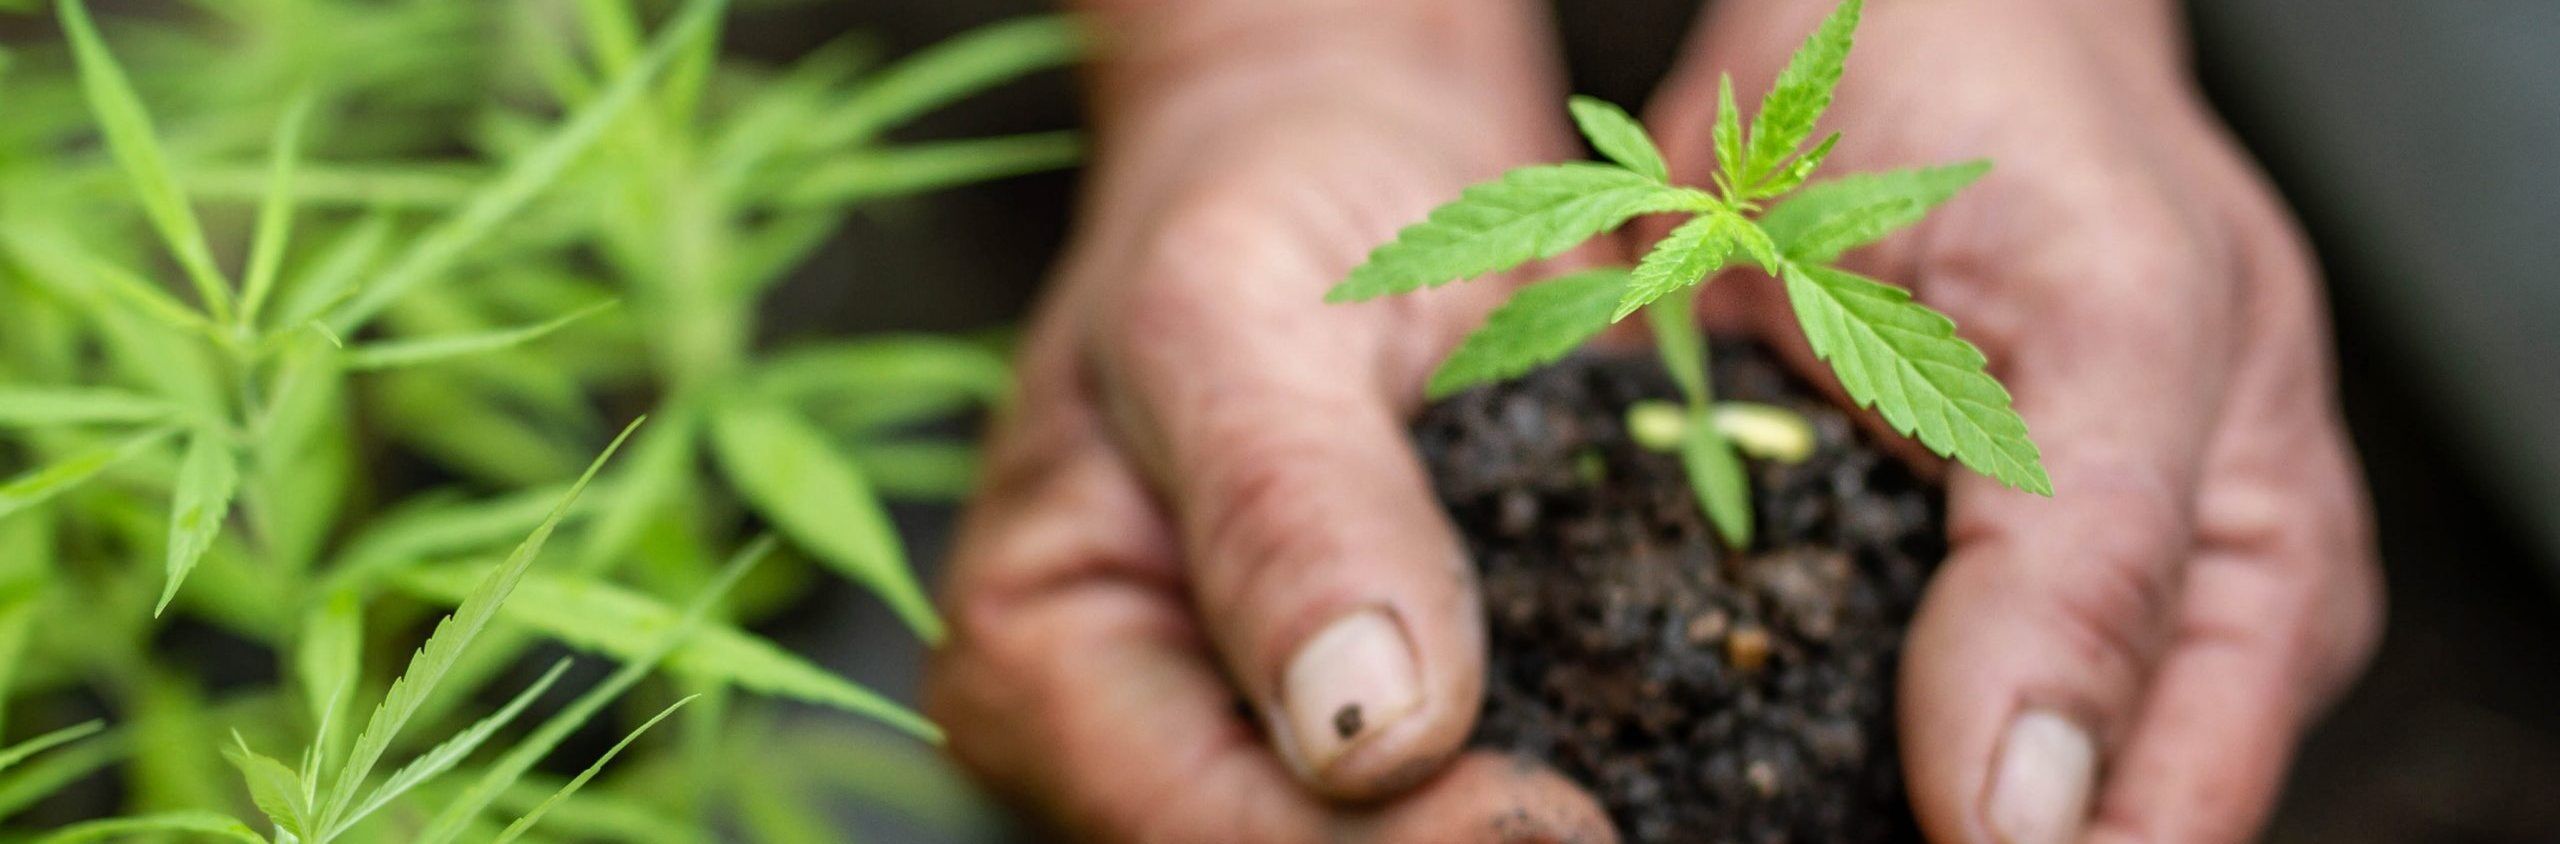 Cannabis seedling in hands